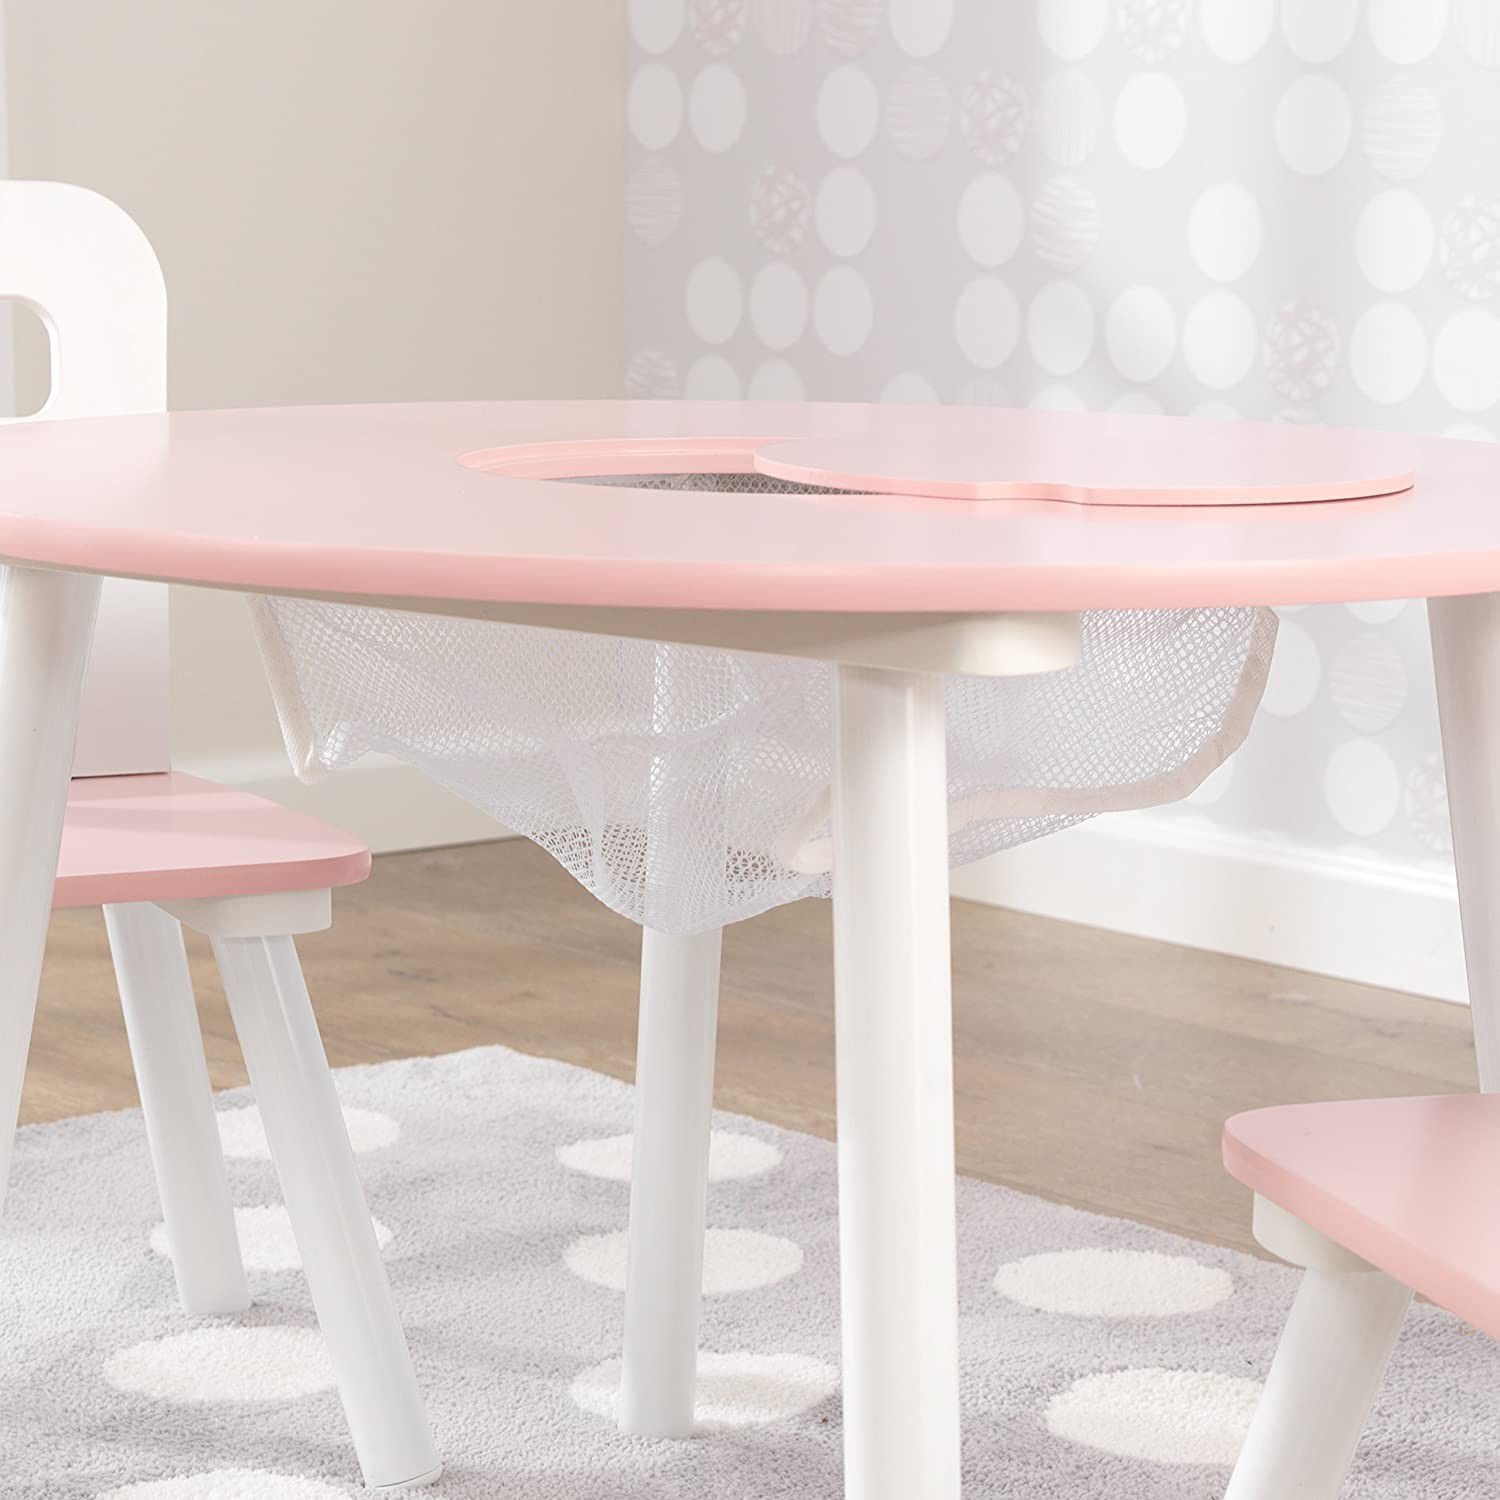 Wooden Round Table & 2 Chair Set with Center Mesh Storage - Pink & White